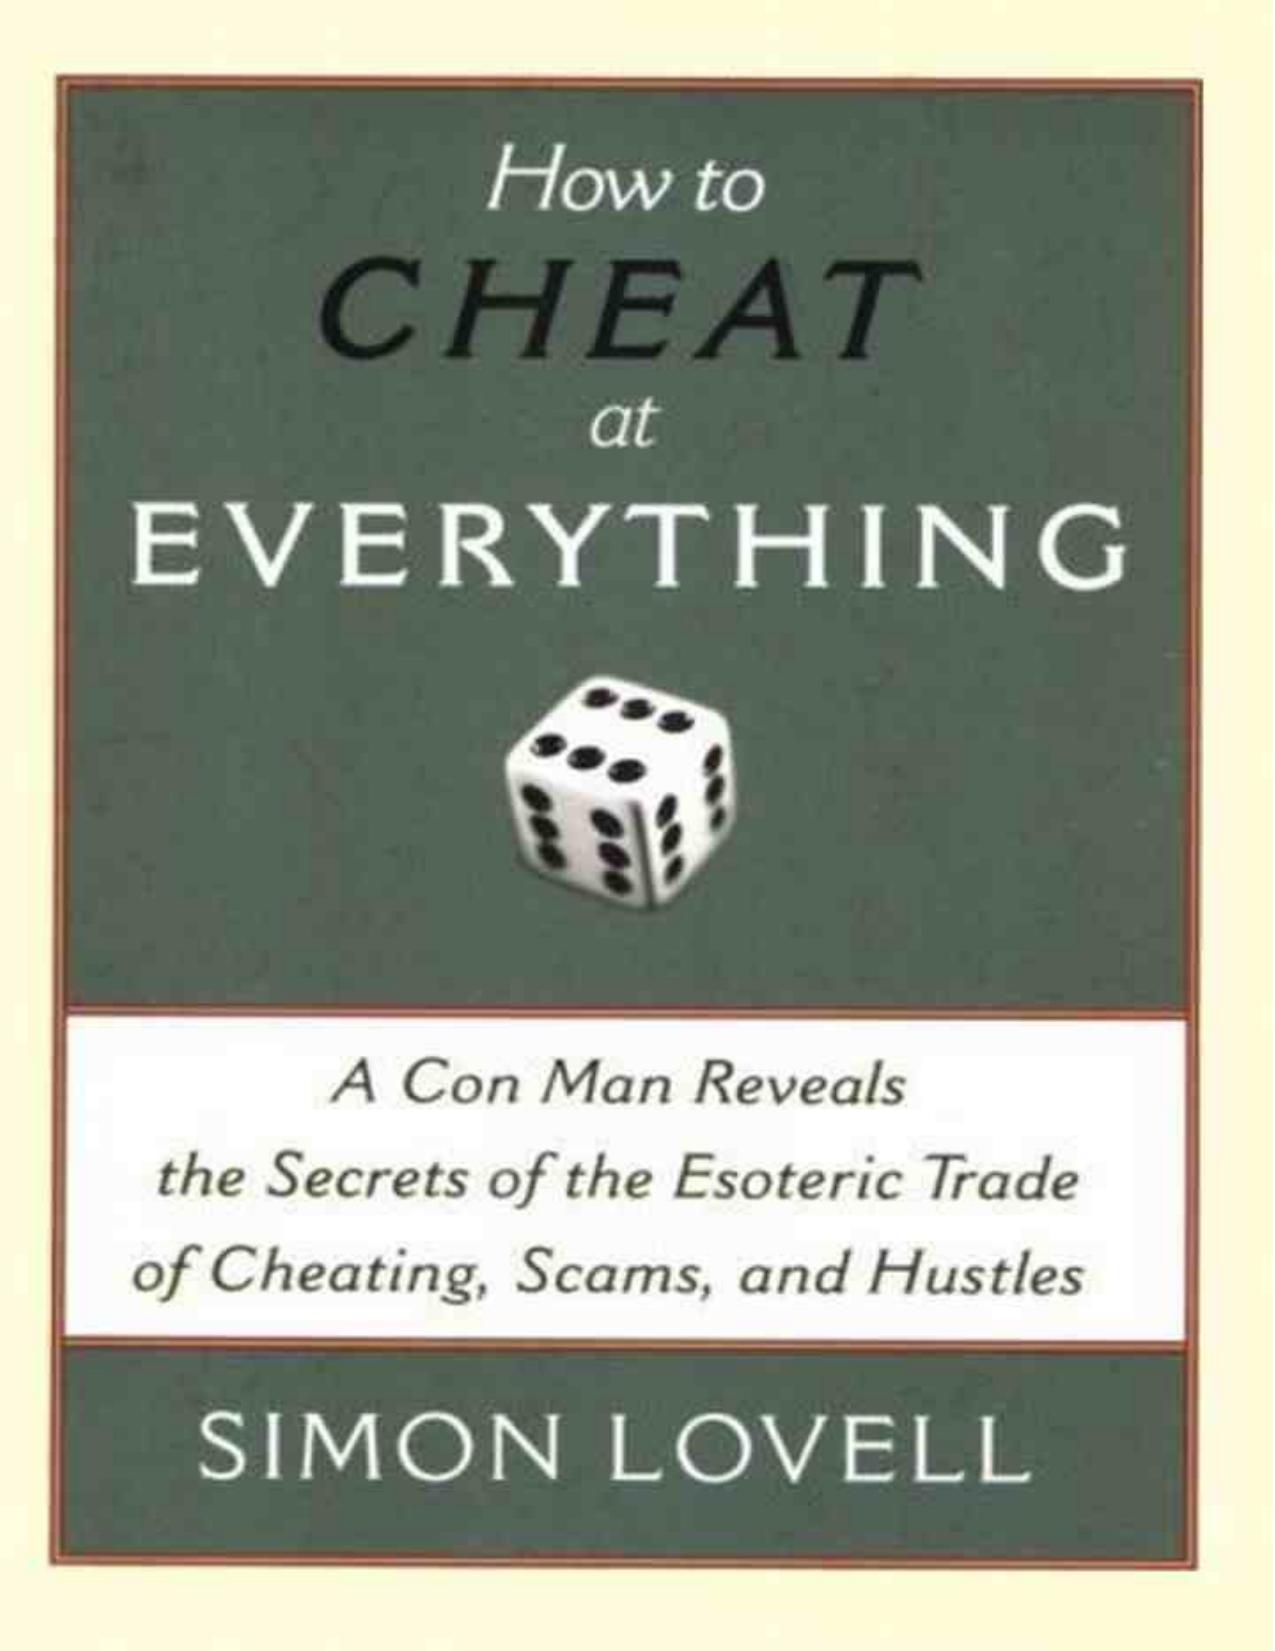 How to Cheat at Everything: A Con Man Reveals the Secrets of the Esoteric Trade of Cheating, Scams, and Hustles by Simon Lovell